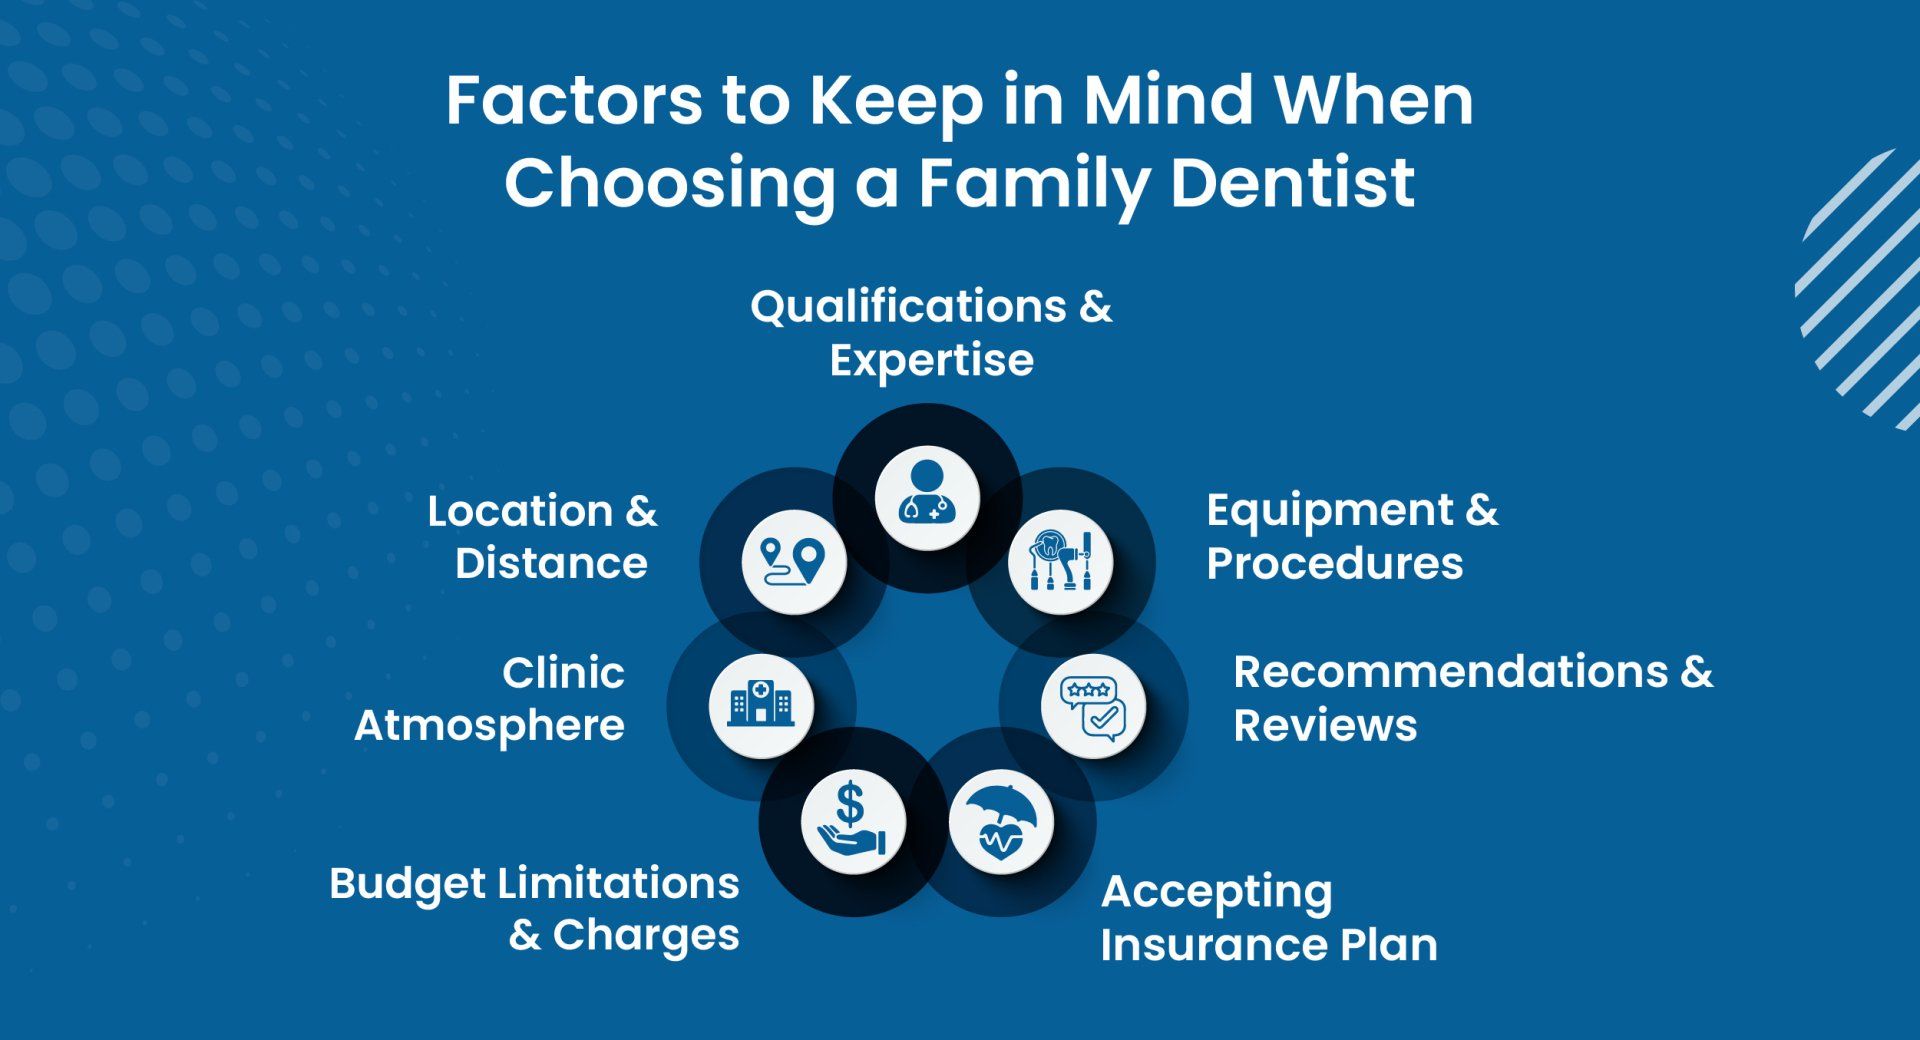 Factors to Keep in Mind When Choosing a Family Dentist